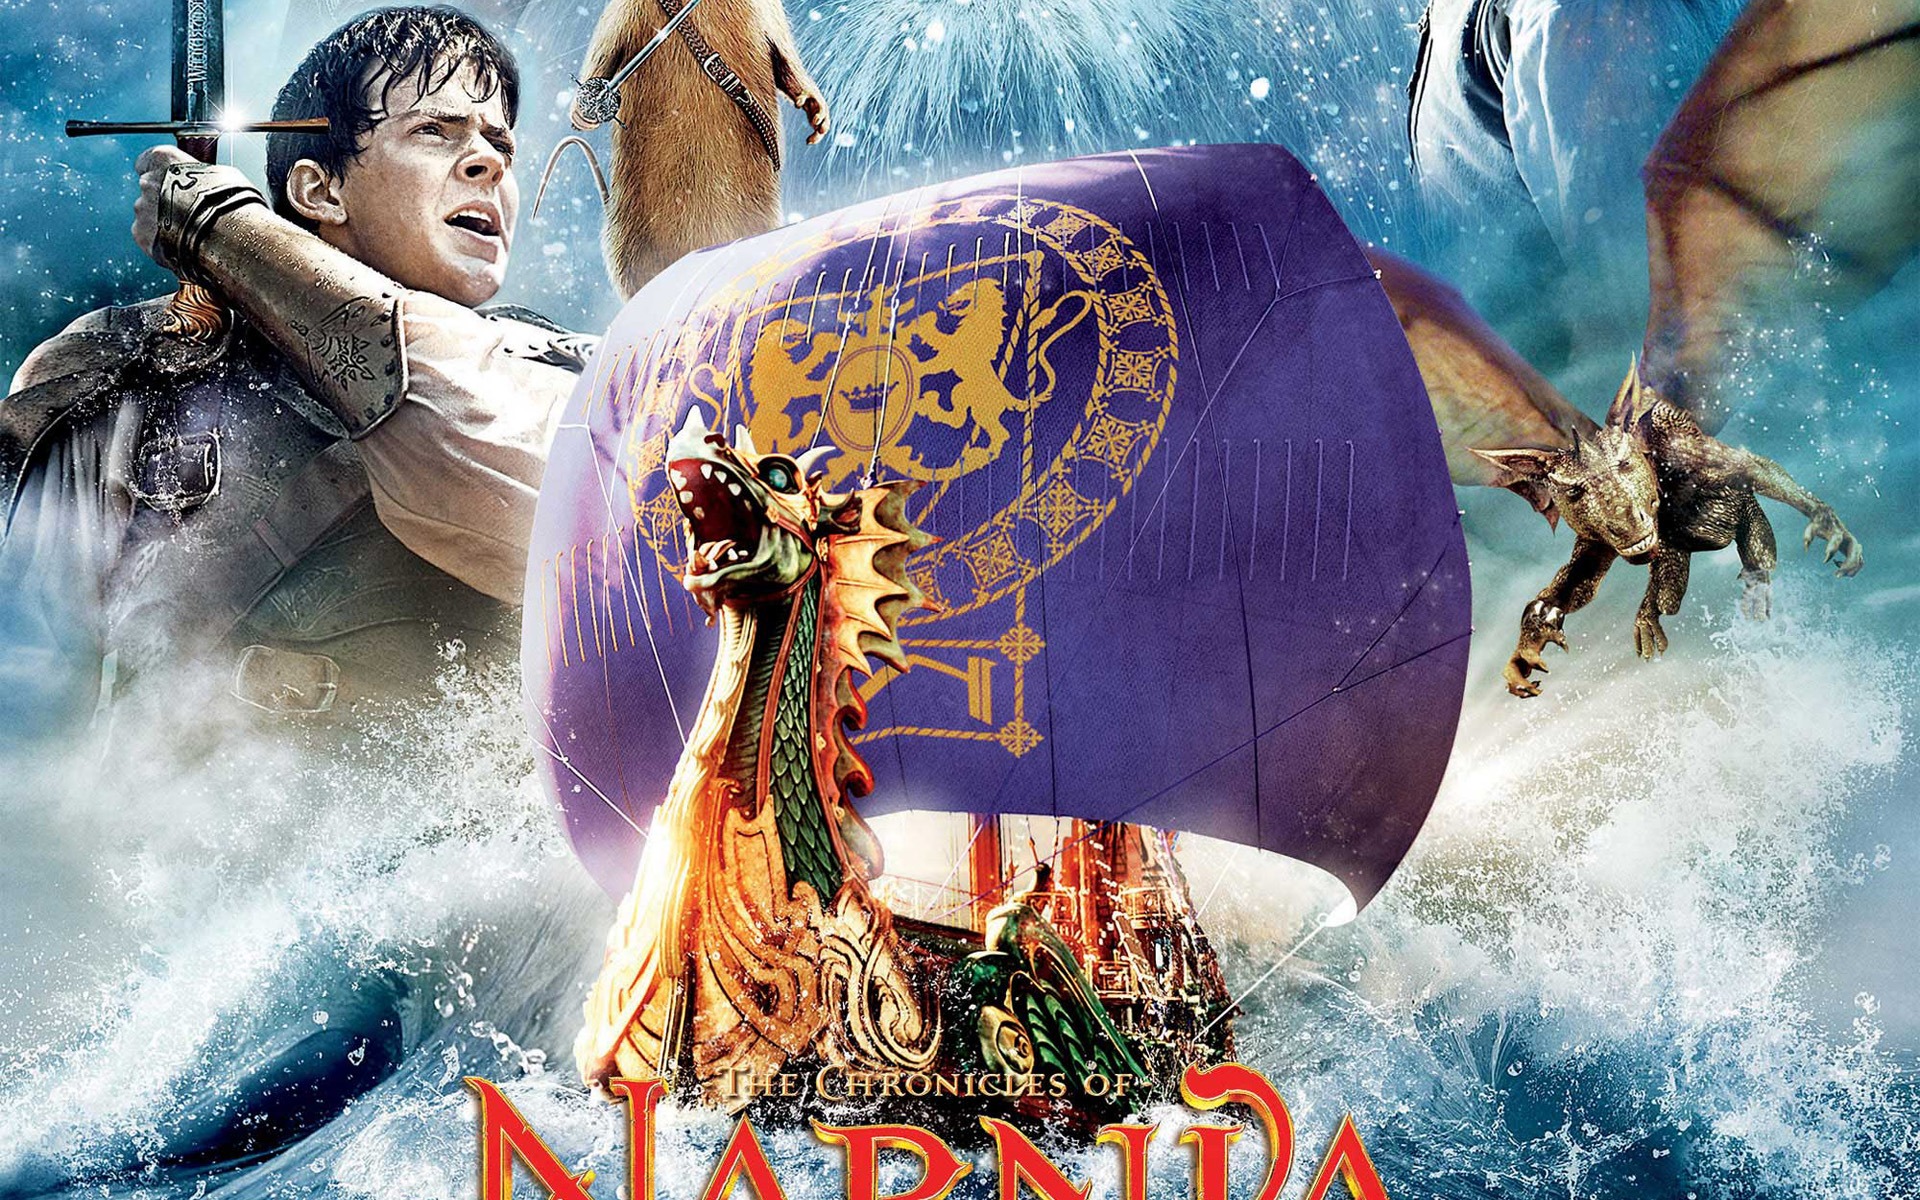 The Chronicles of Narnia: The Voyage of the Dawn Treader wallpapers #1 - 1920x1200